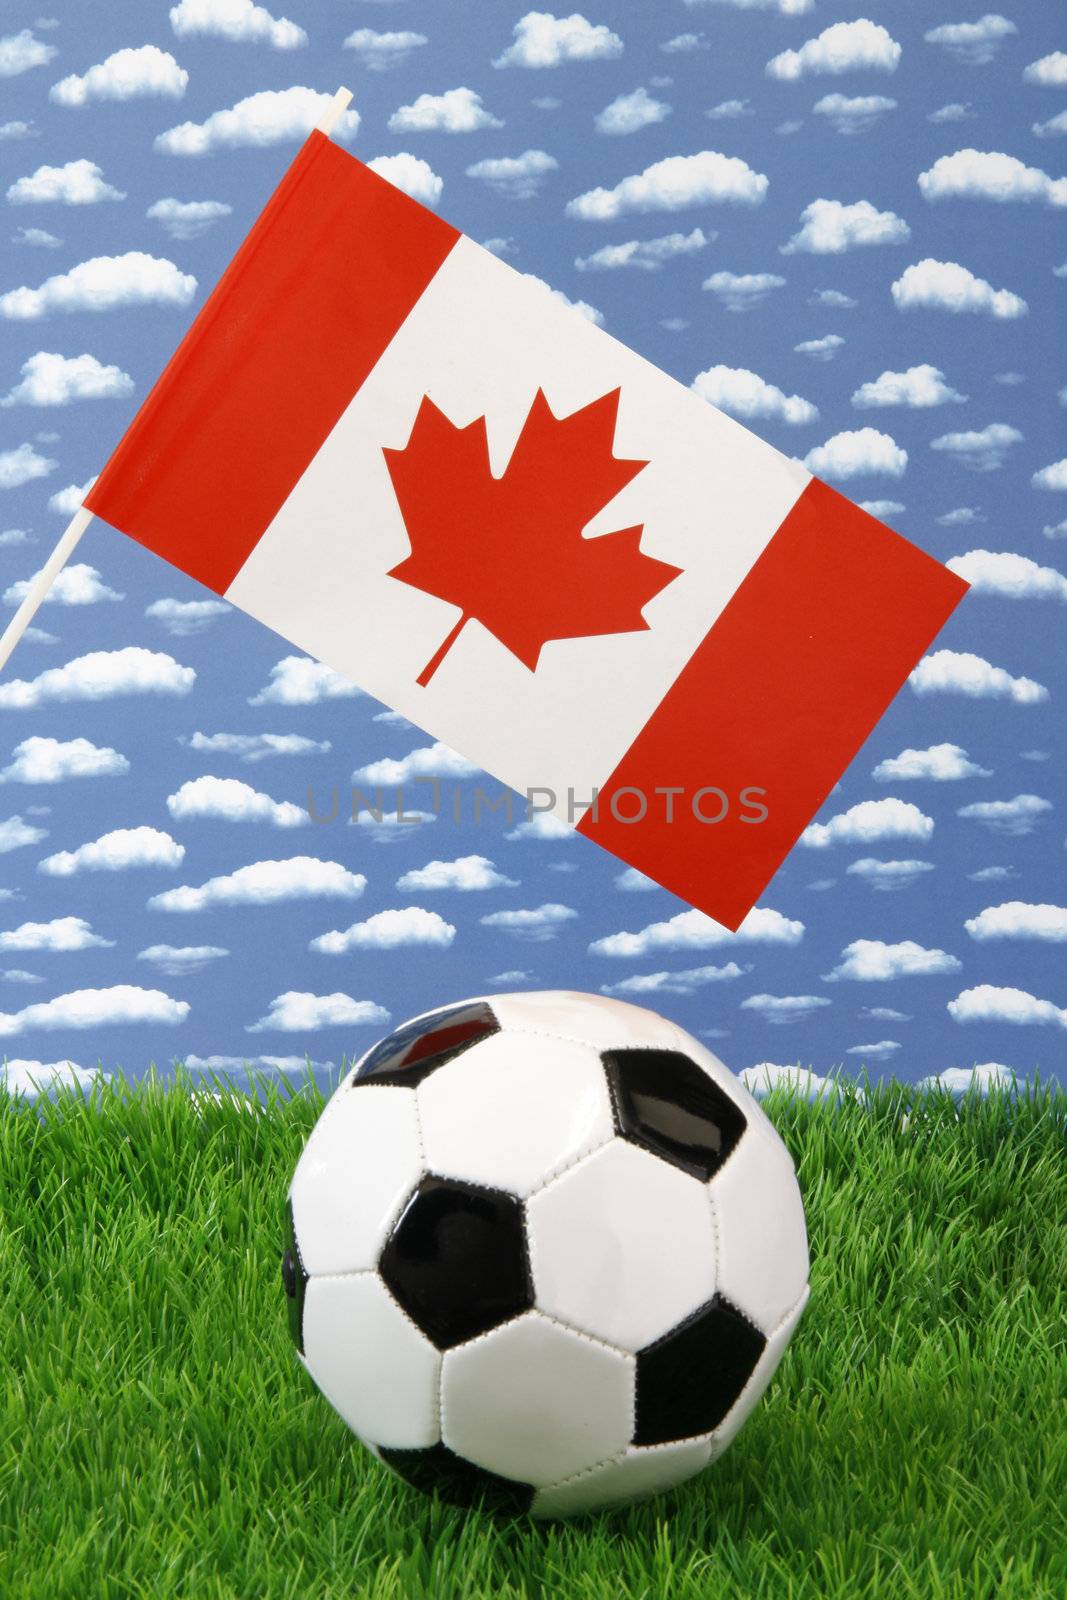 Soccerball on grass with Canadian national flag over sky background